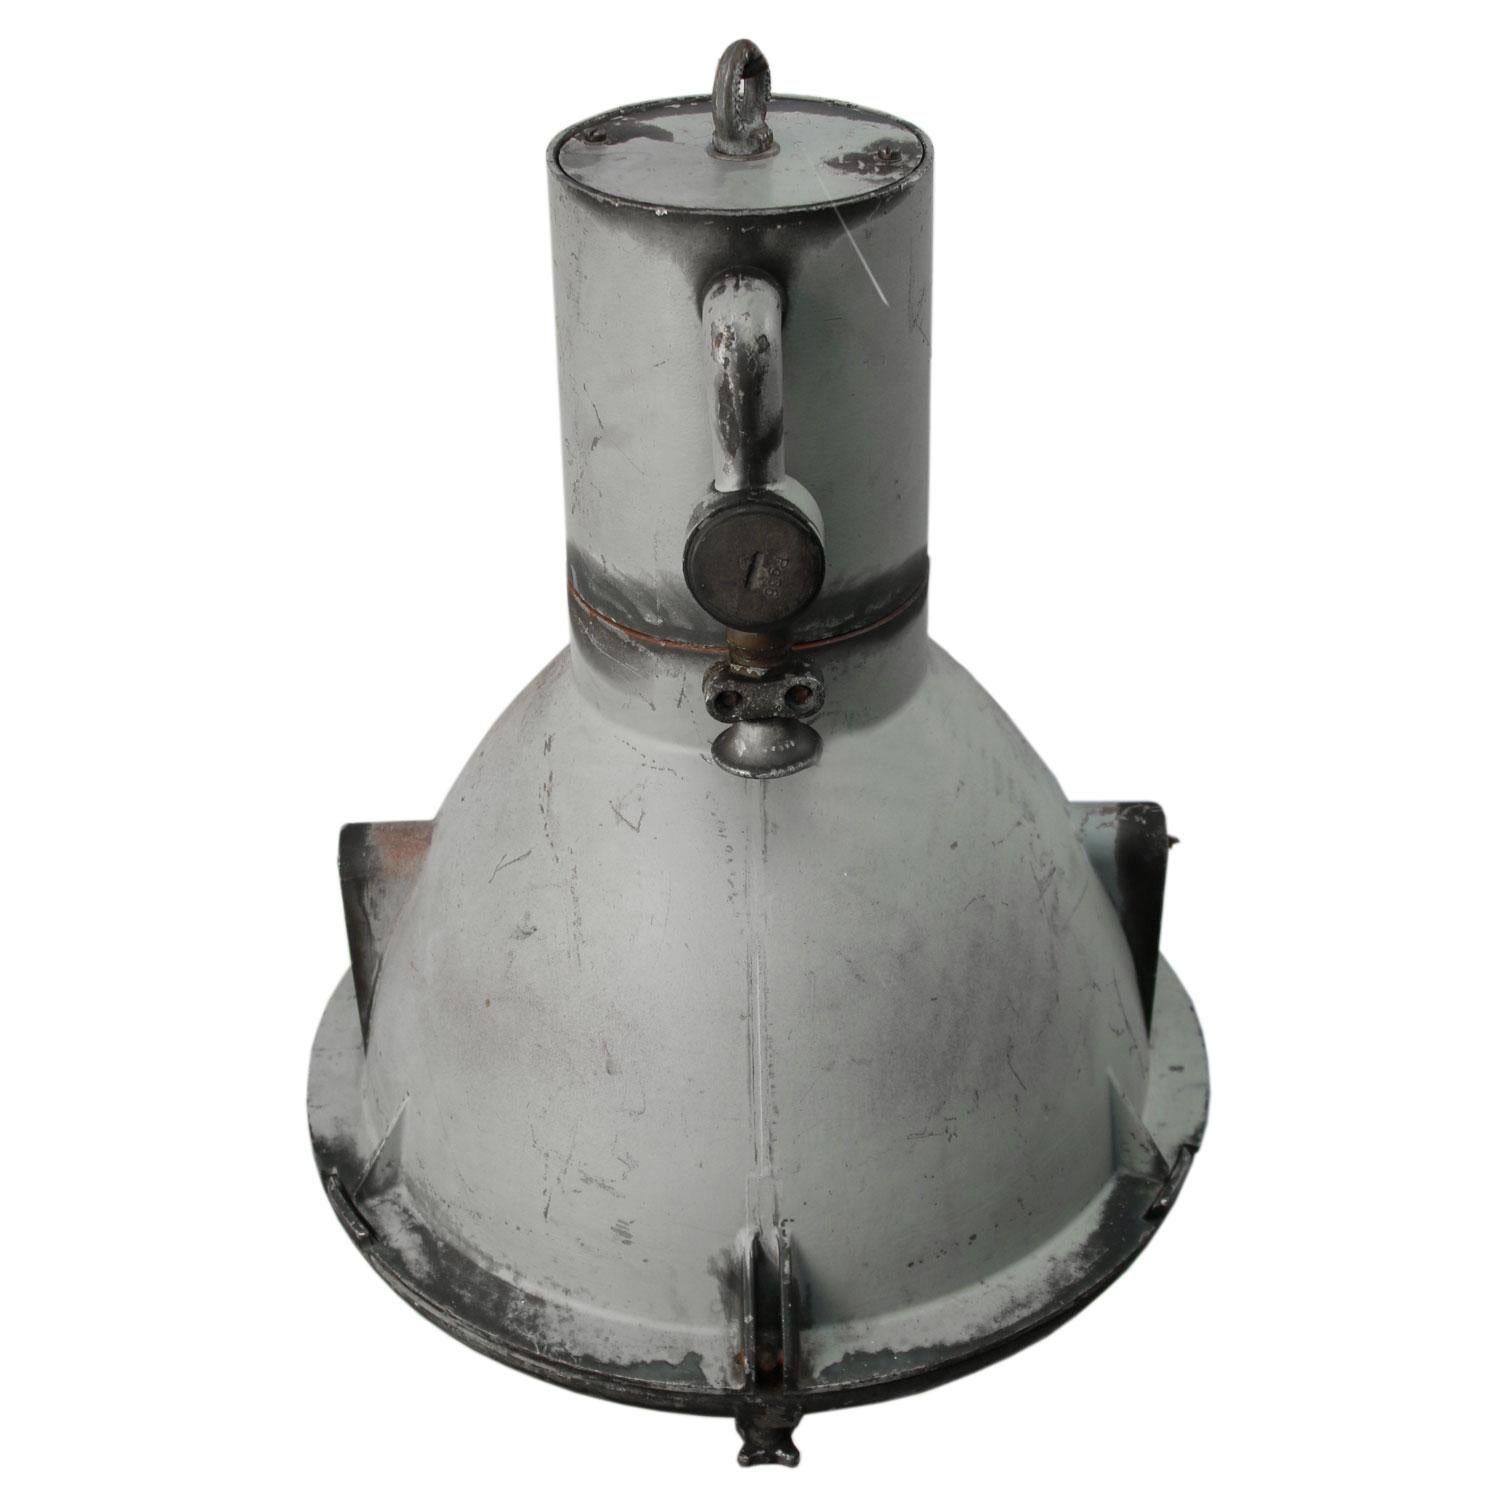 Industrial hanging lamp.
Grey cast aluminum and metal.
Clear glass

Weight: 13.50 kg / 29.8 lb

Priced per individual item. All lamps have been made suitable by international standards for incandescent light bulbs, energy-efficient and LED bulbs.